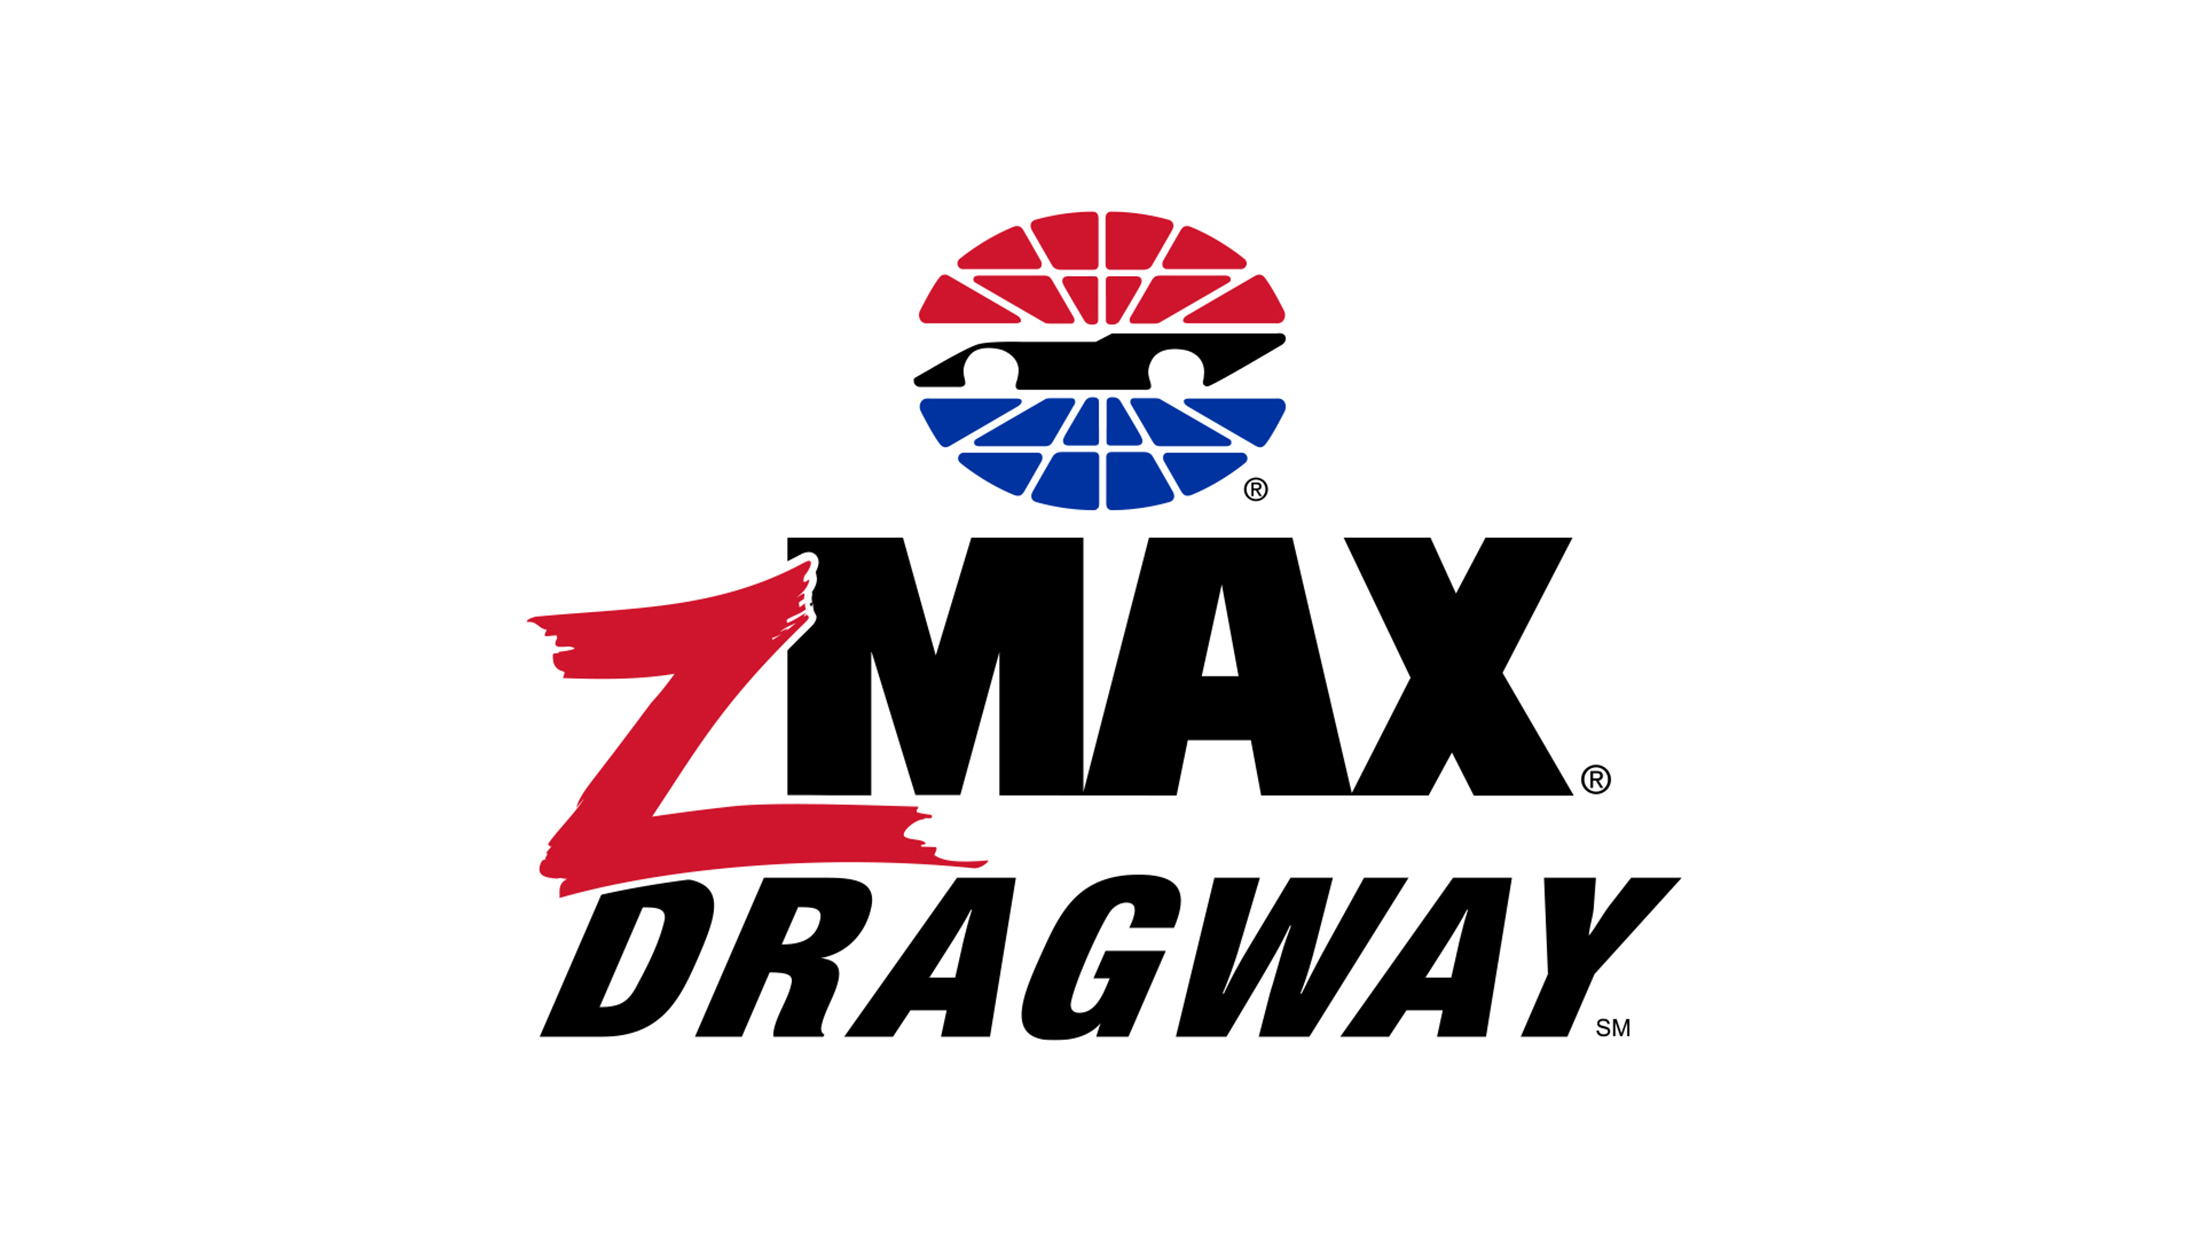 zMAX Dragway Tickets | Single Game Tickets & Schedule | Ticketmaster.com